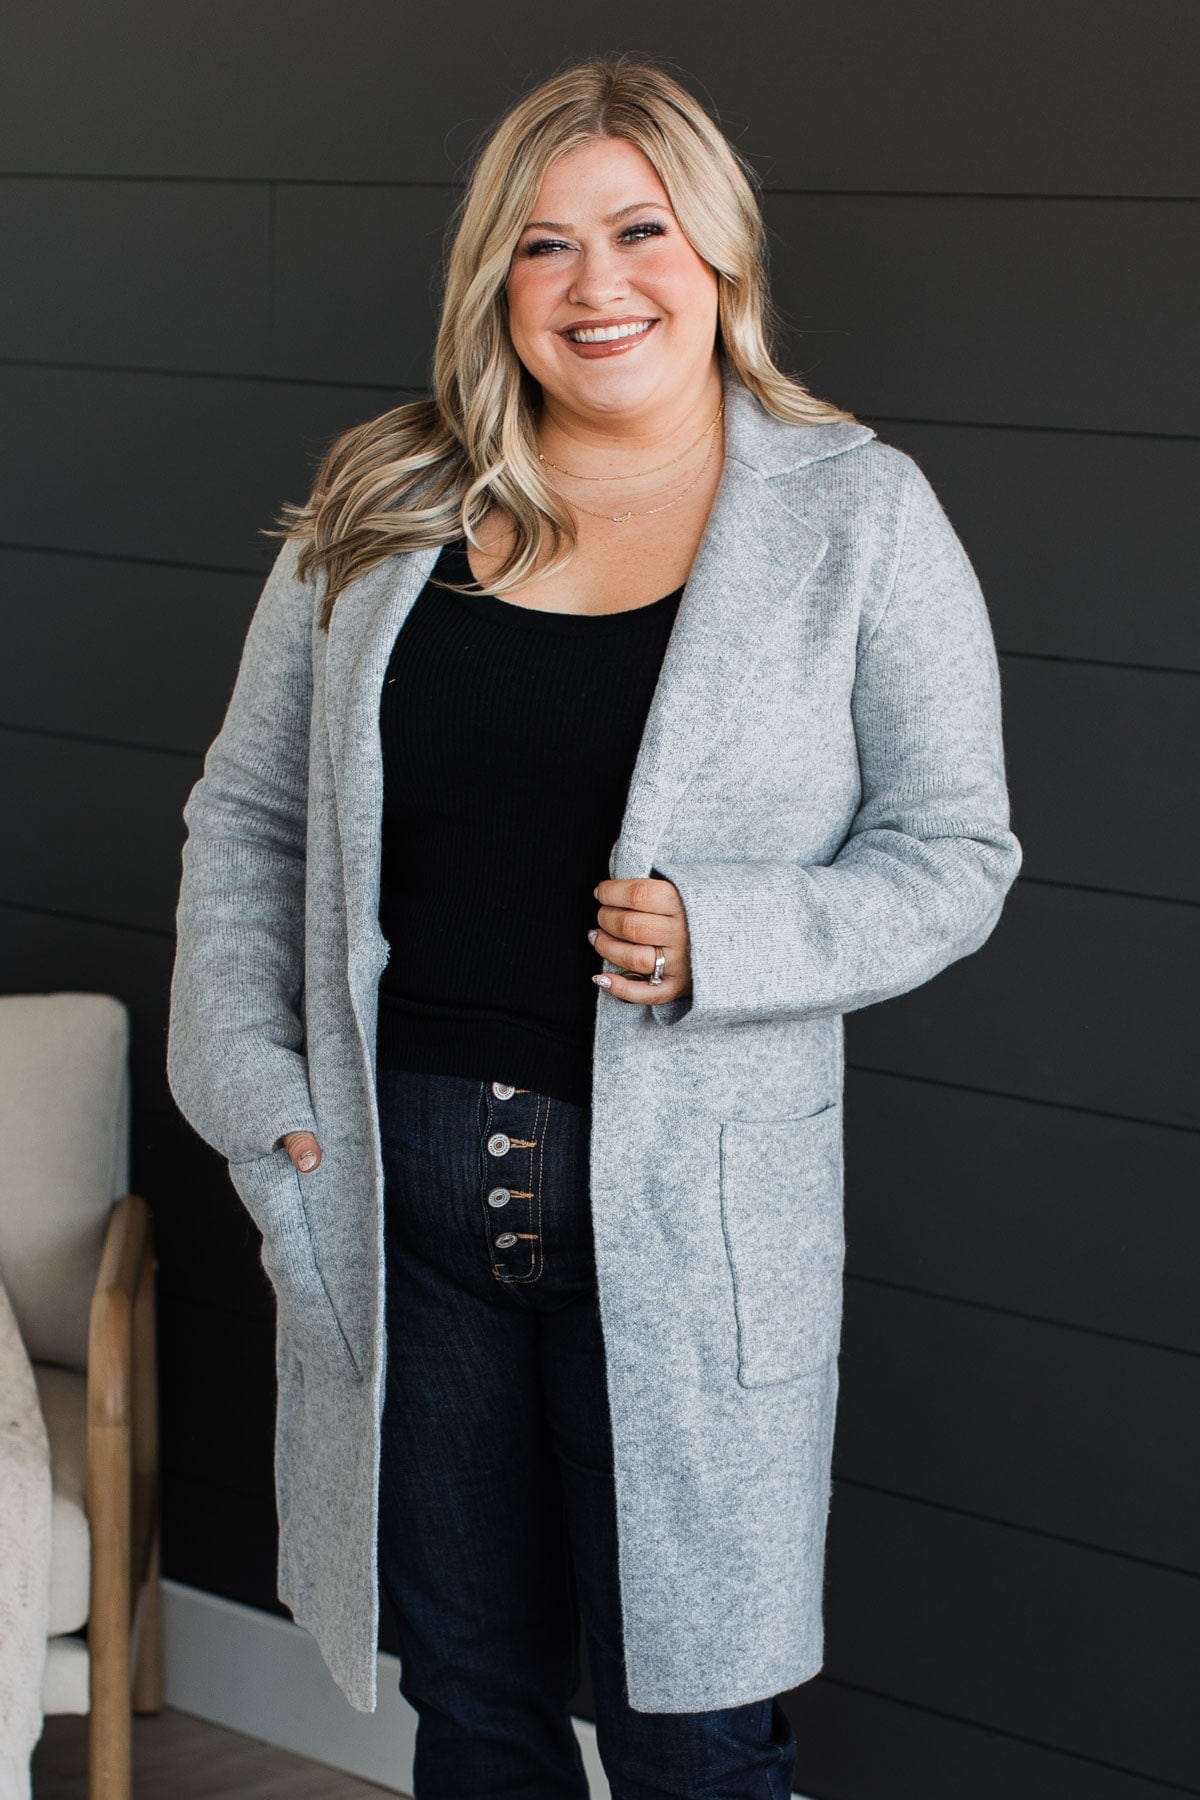 The Catherine - Women's Plus Size Cardigan in Charcoal – Apple